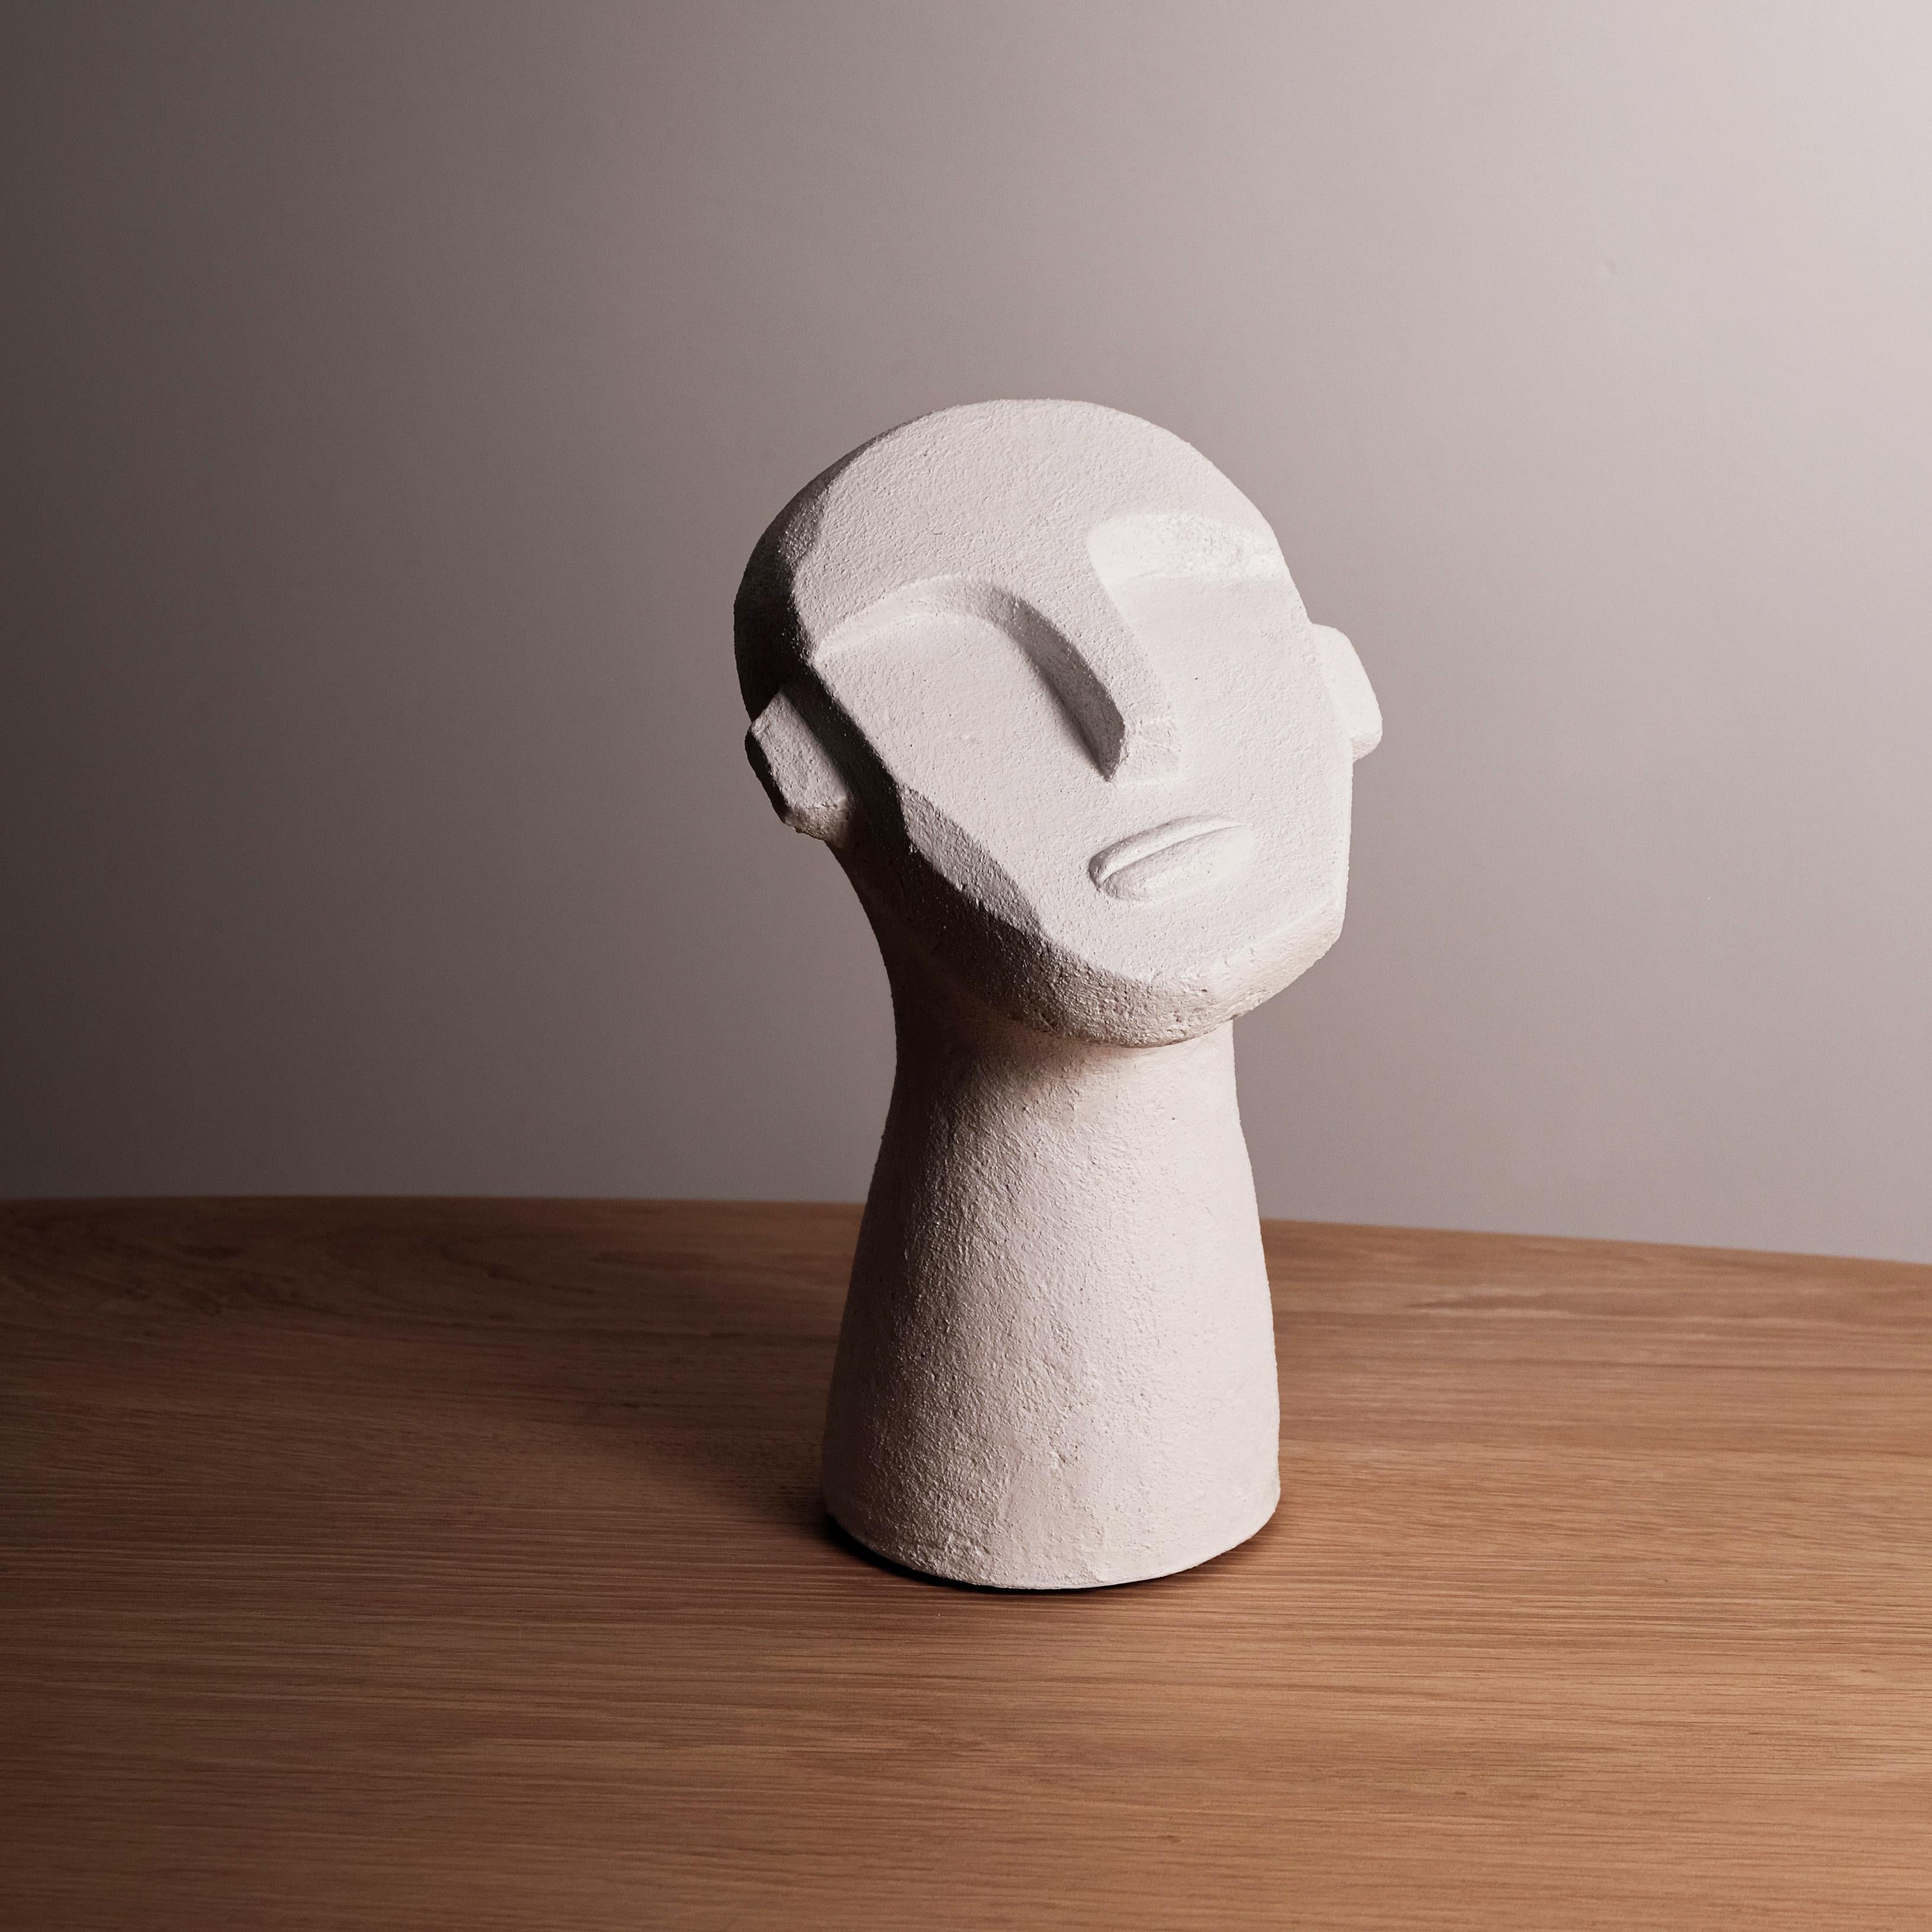 White cement cast molded Brutalist style bust tabletop sculpture.